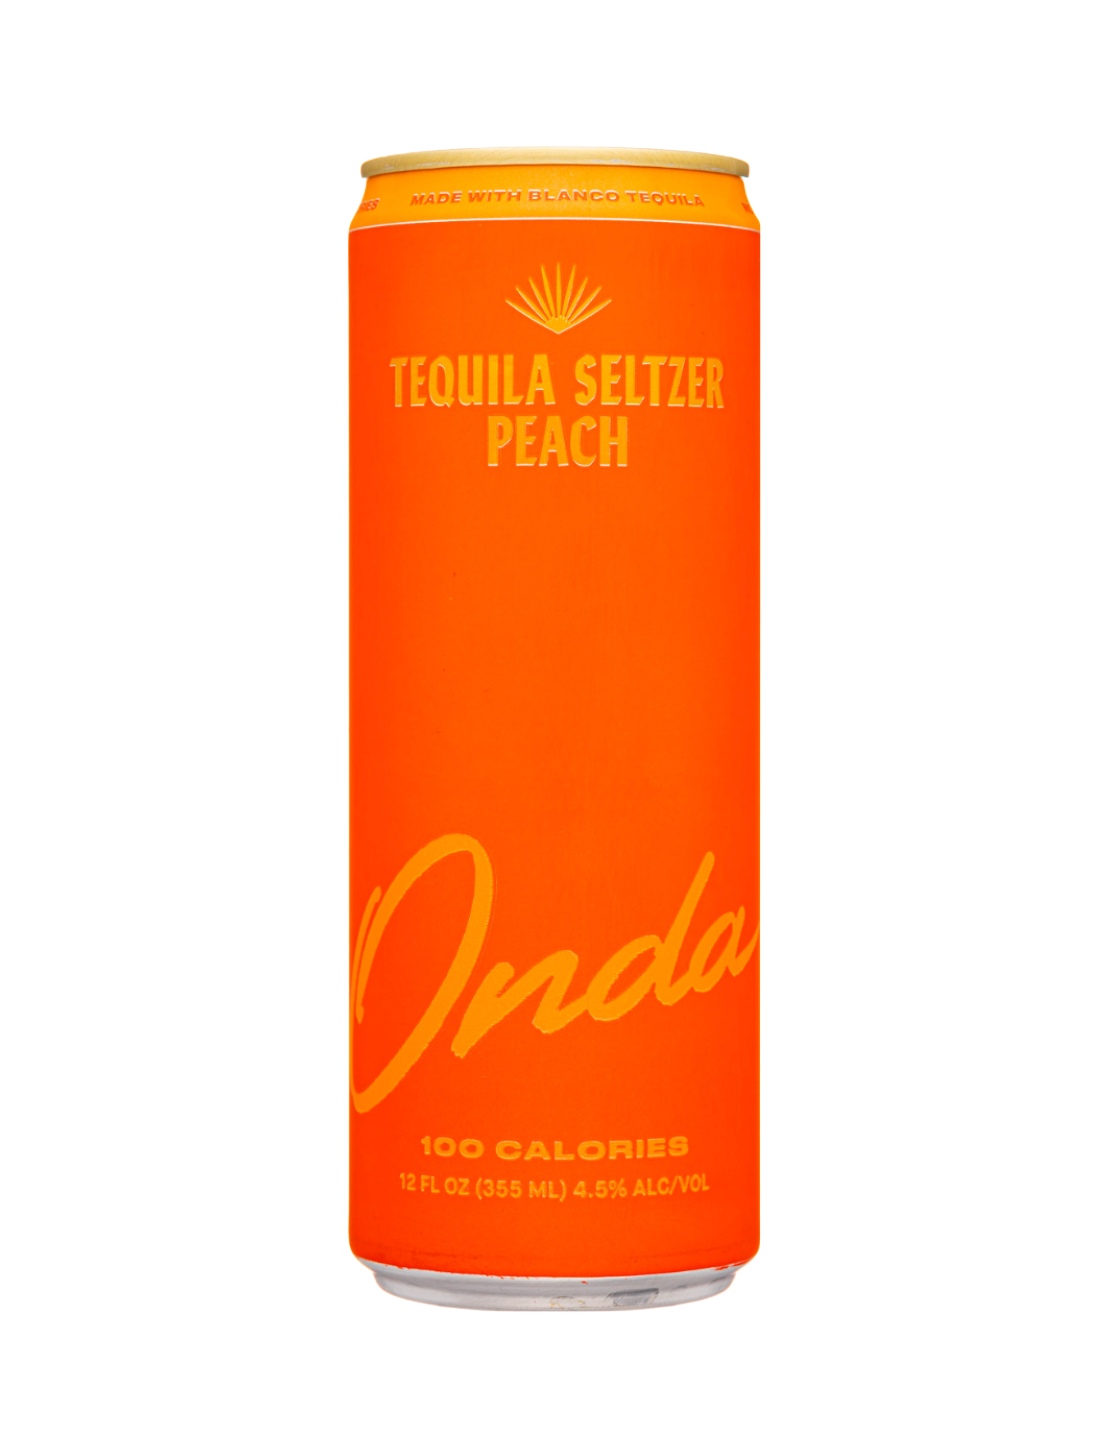 An orange can of Onda Tequila Seltzer Peach in front of a plain white background